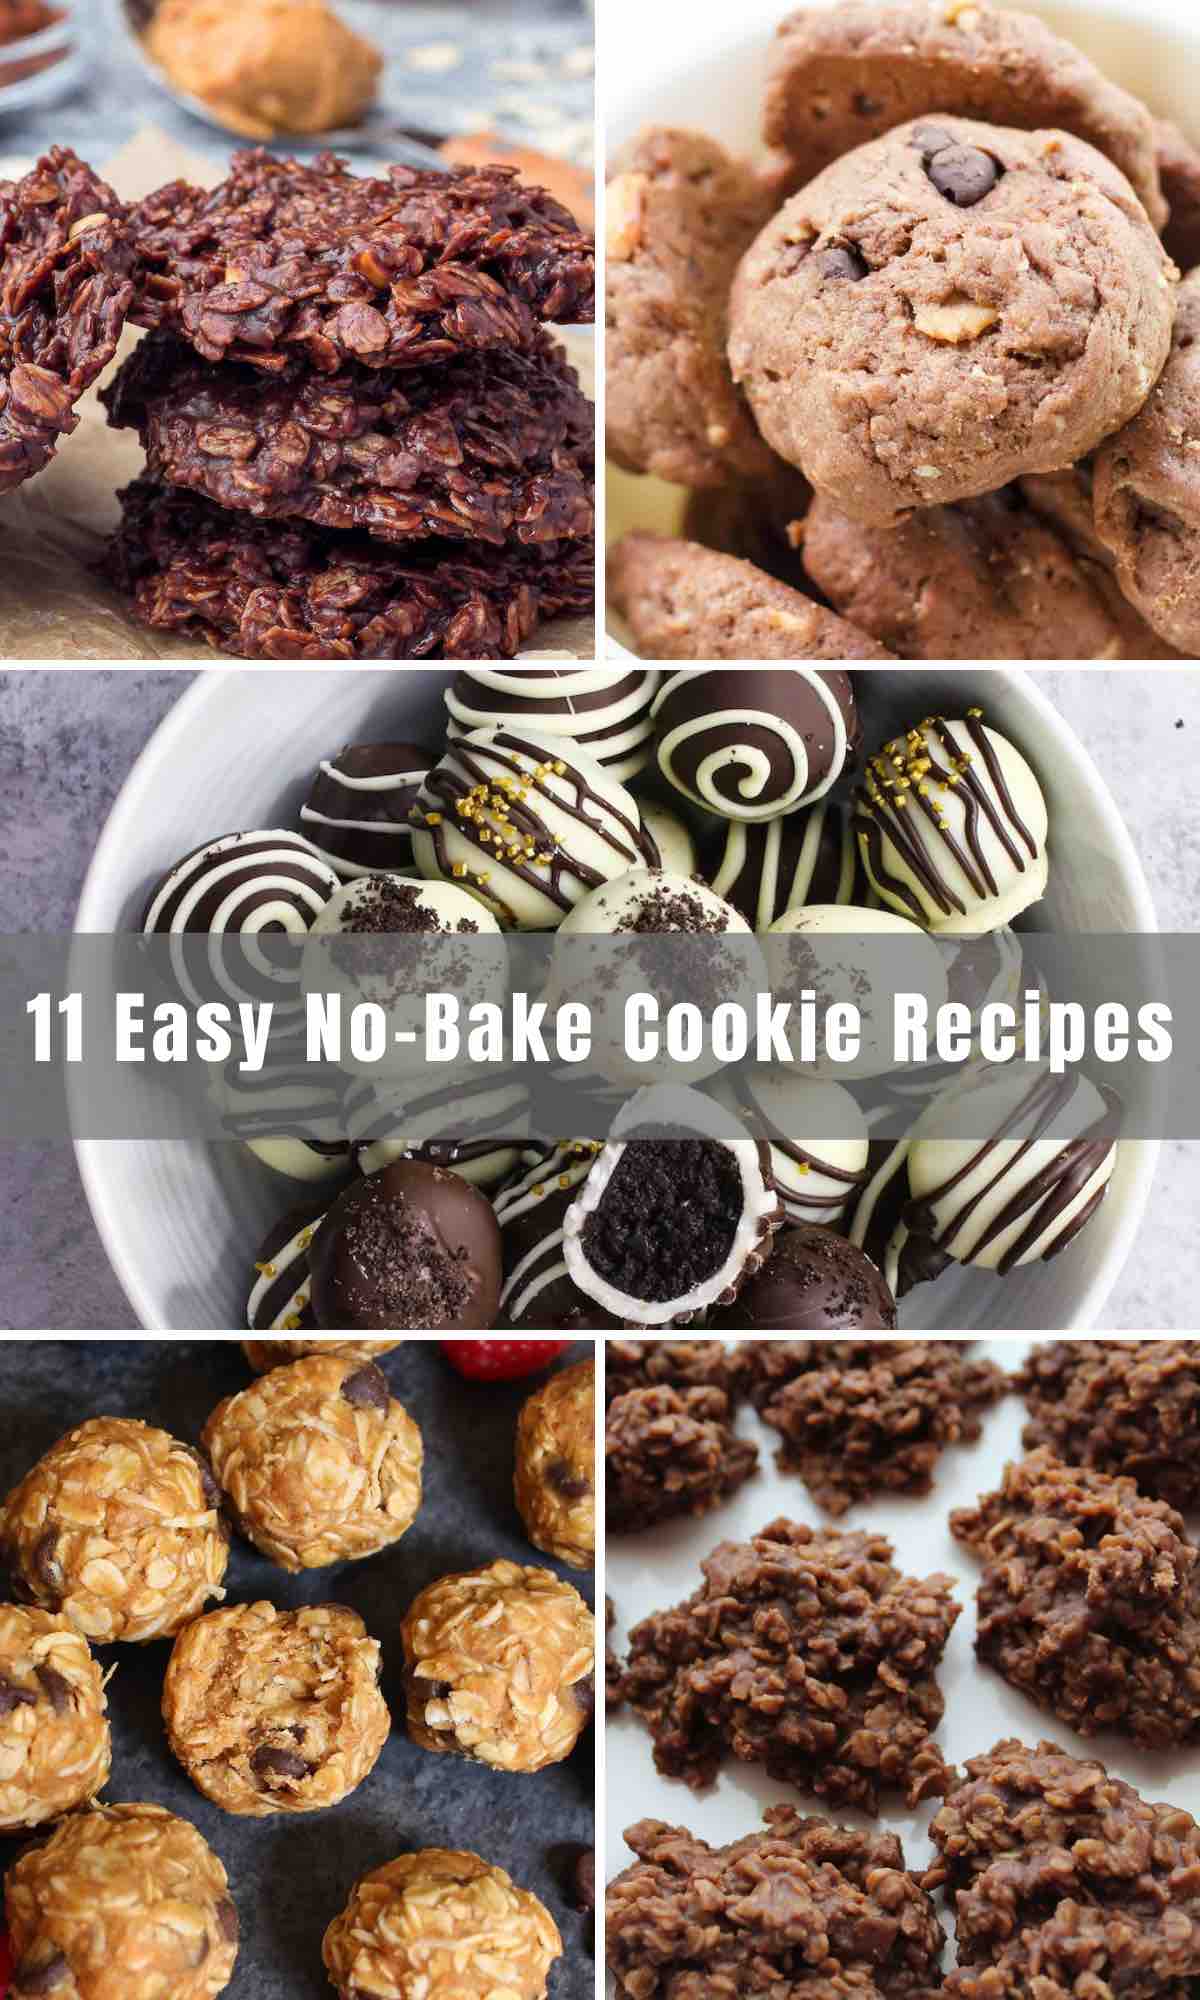 Craving a sweet treat but don't feel like heating up the oven? Try these 11 Easy No-bake Cookie Recipes! From peanut butter to chocolate chip flavor to 3-ingredient cookies, you simply can’t go wrong with any of these no-bake quick and classic cookies!